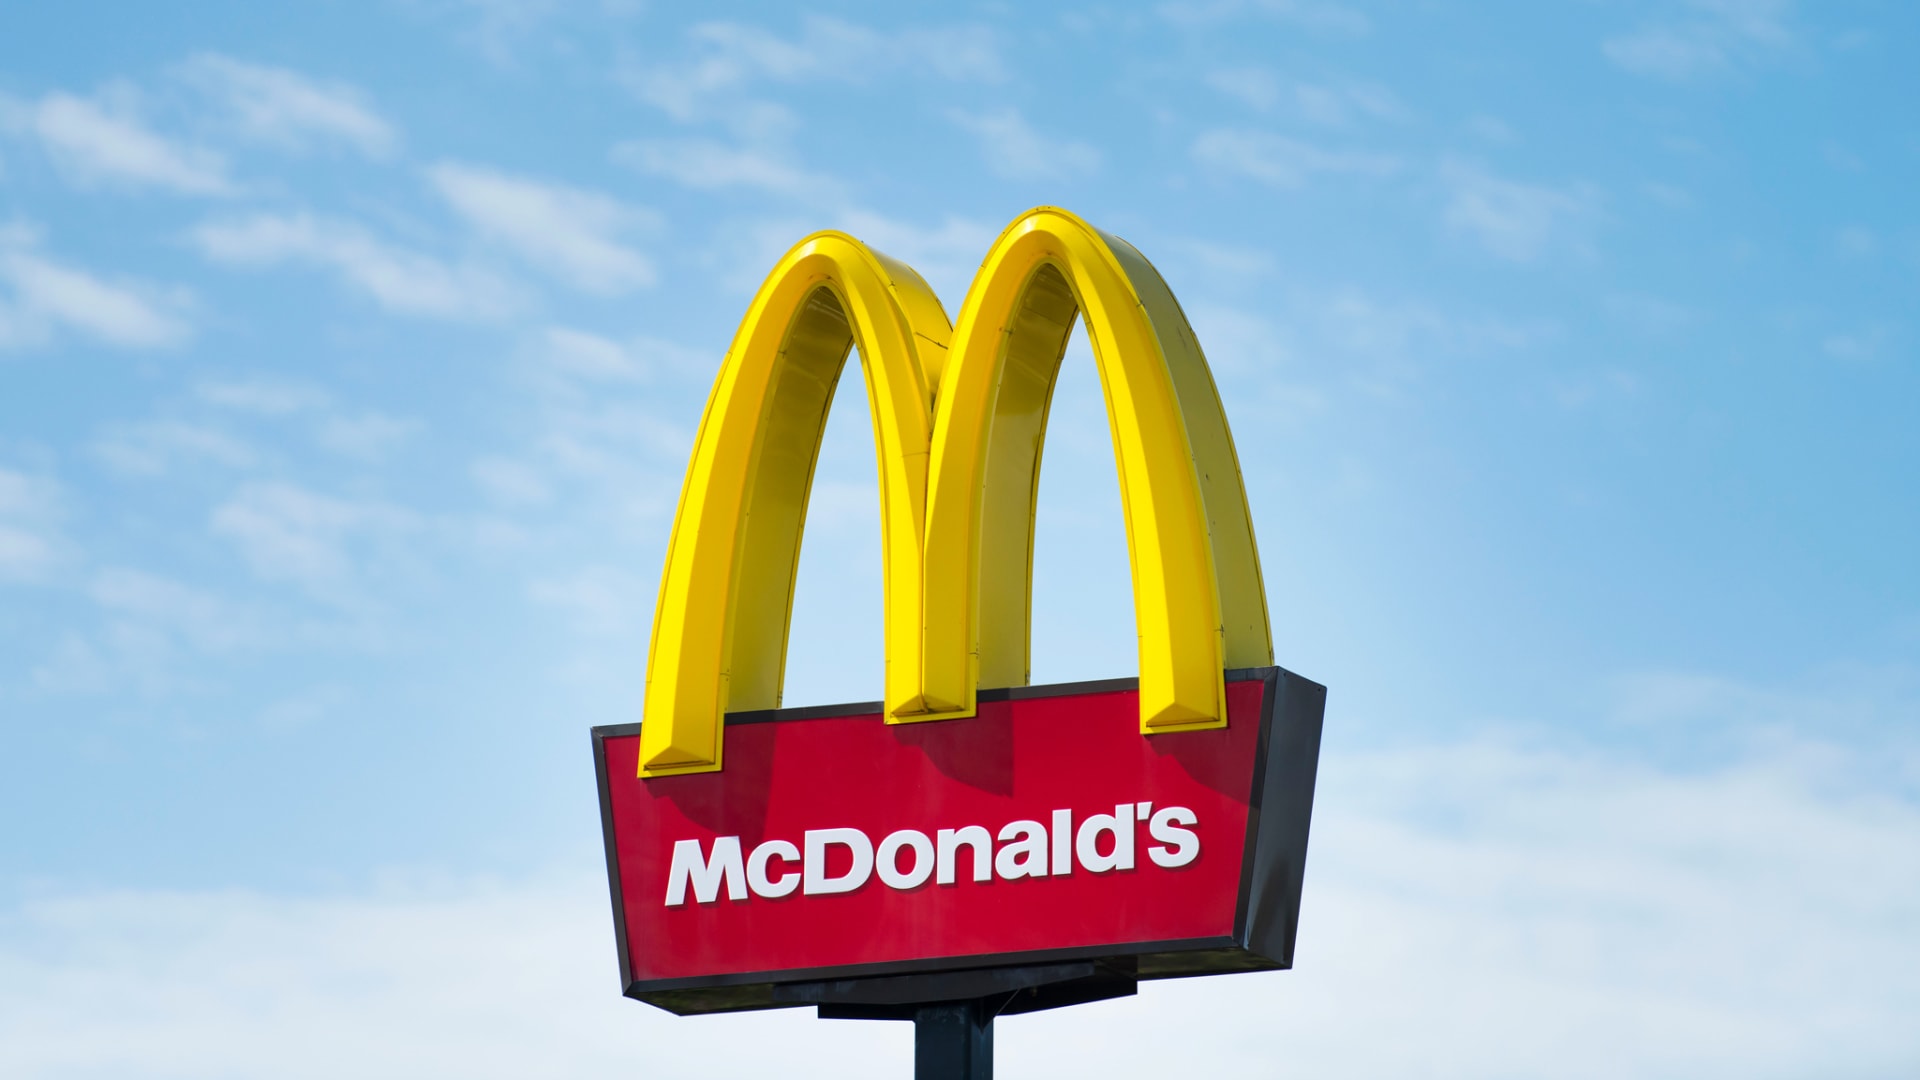 McDonald's Just Announced a Big Change in Plans. Here's the Key Takeaway